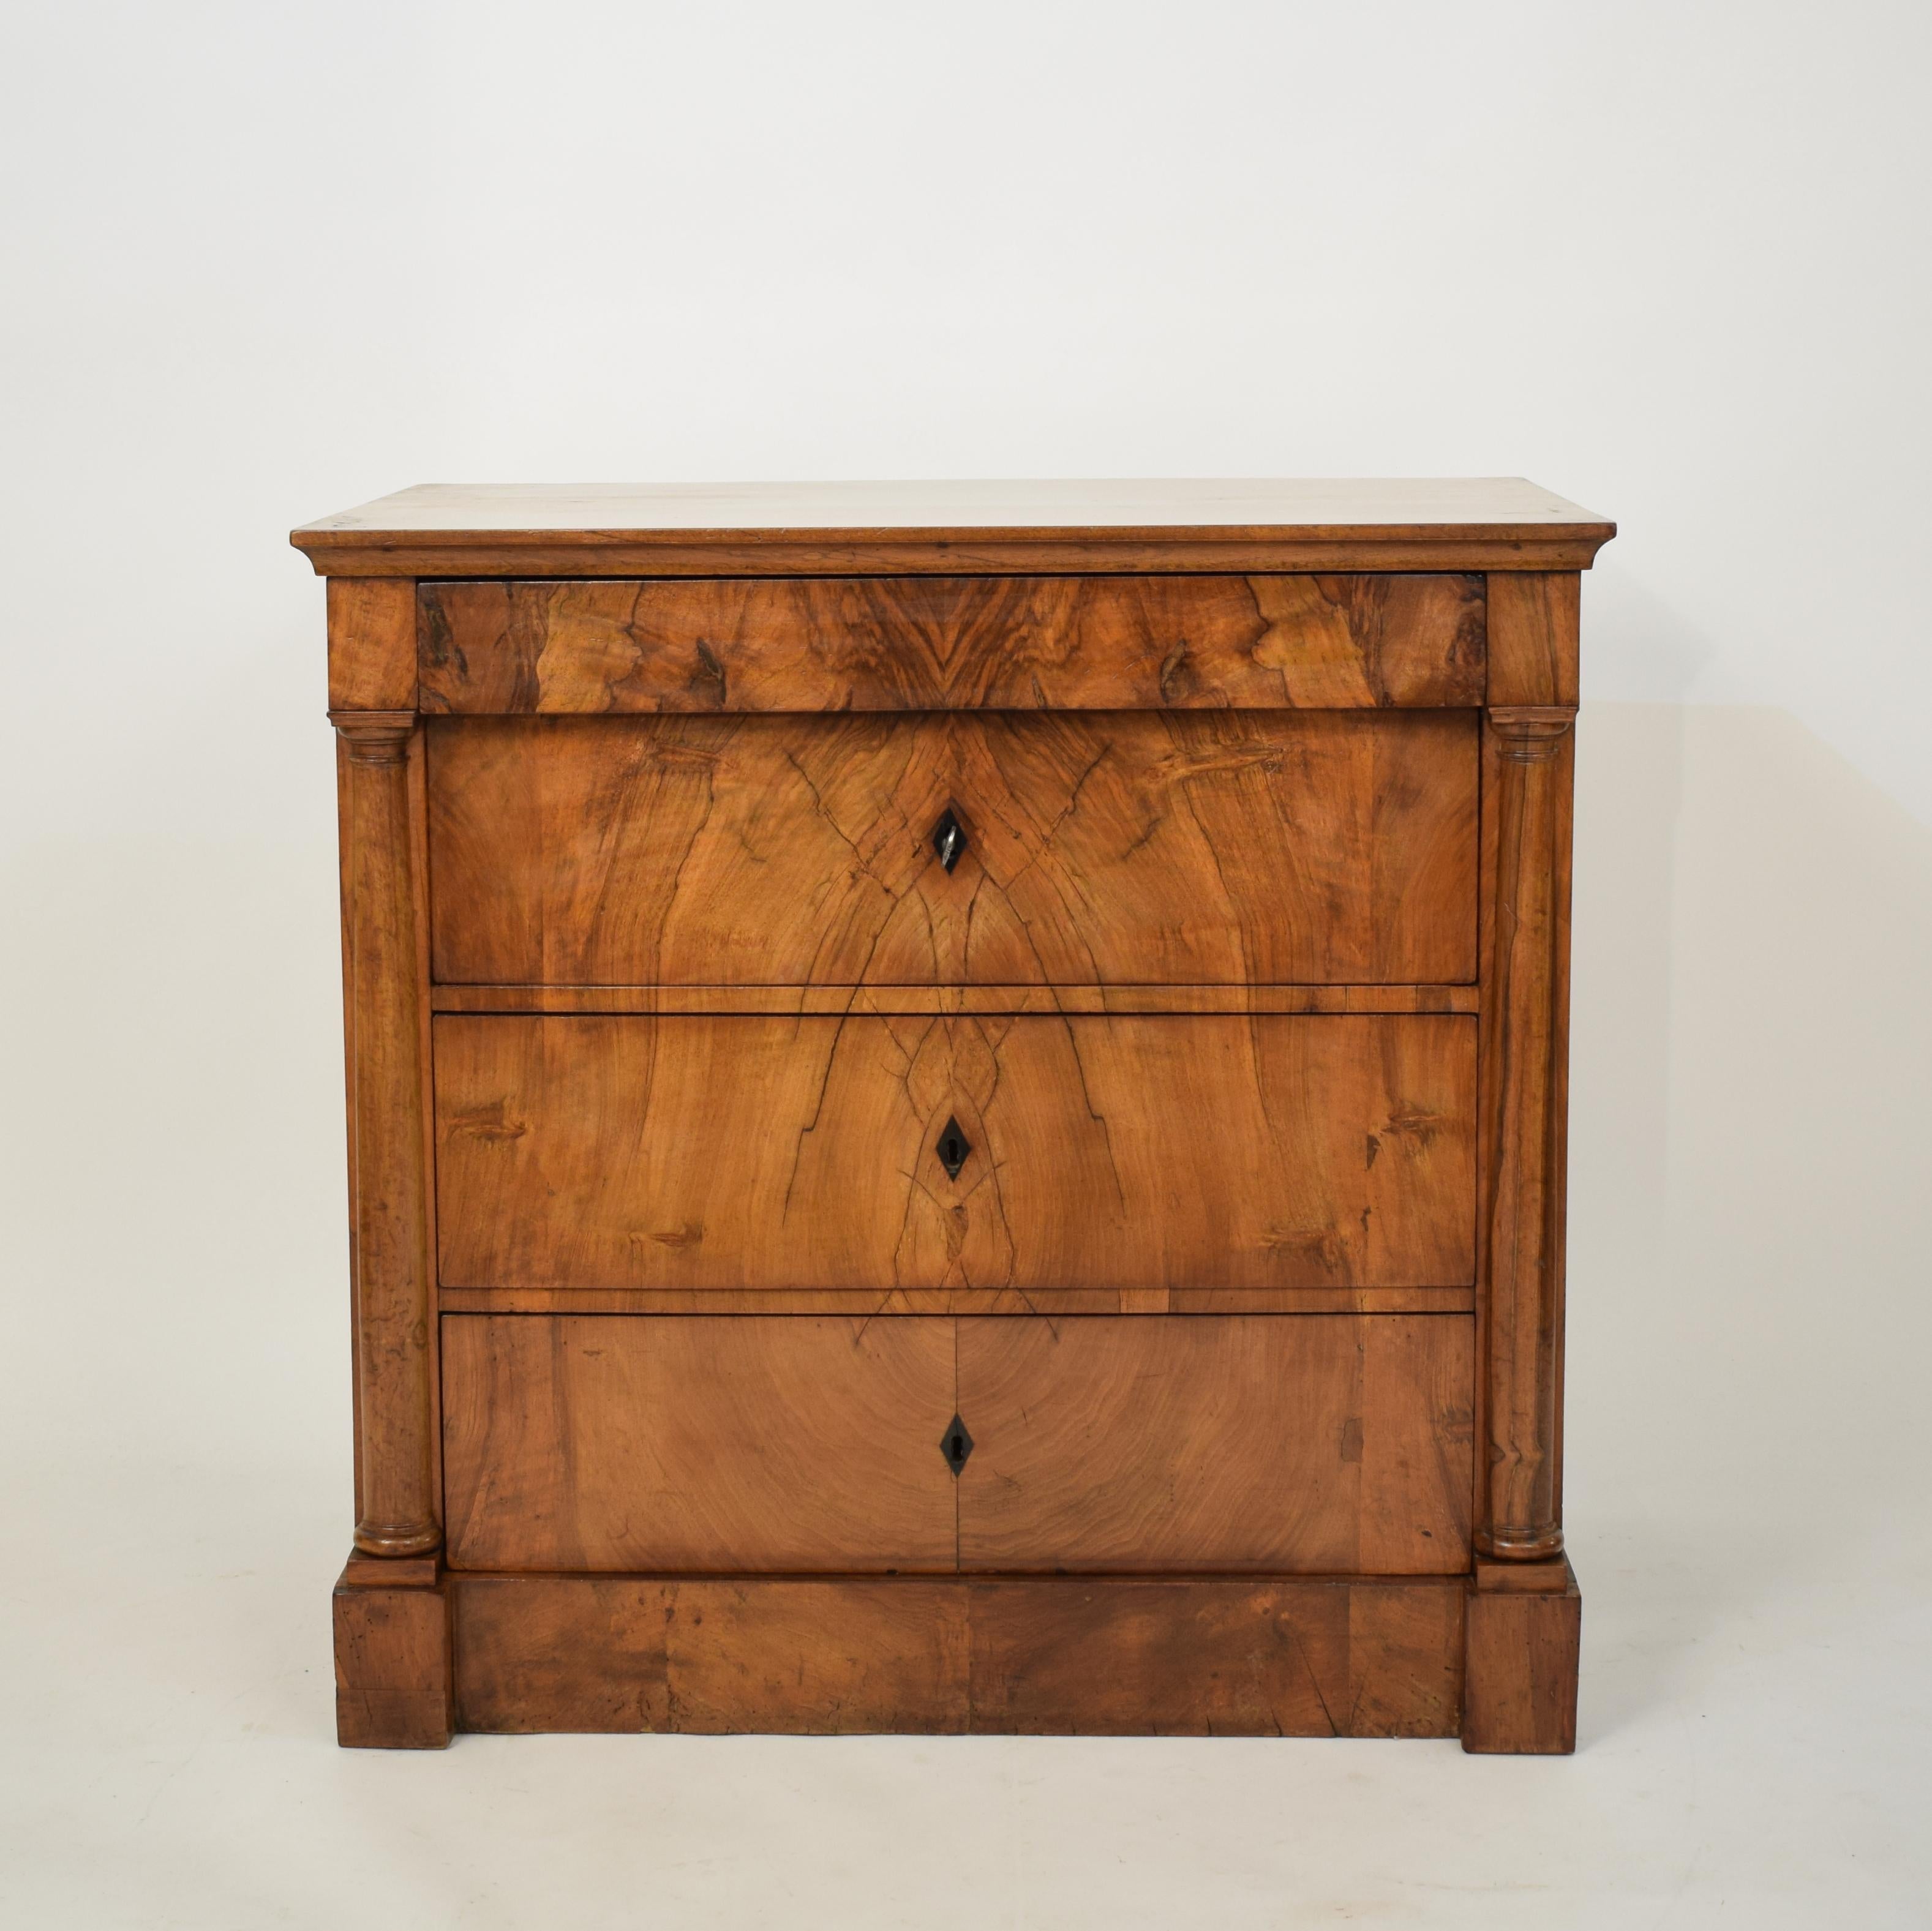 This beautiful Biedermeier commode was made circa 1820 in South Germany. Probably made by the 